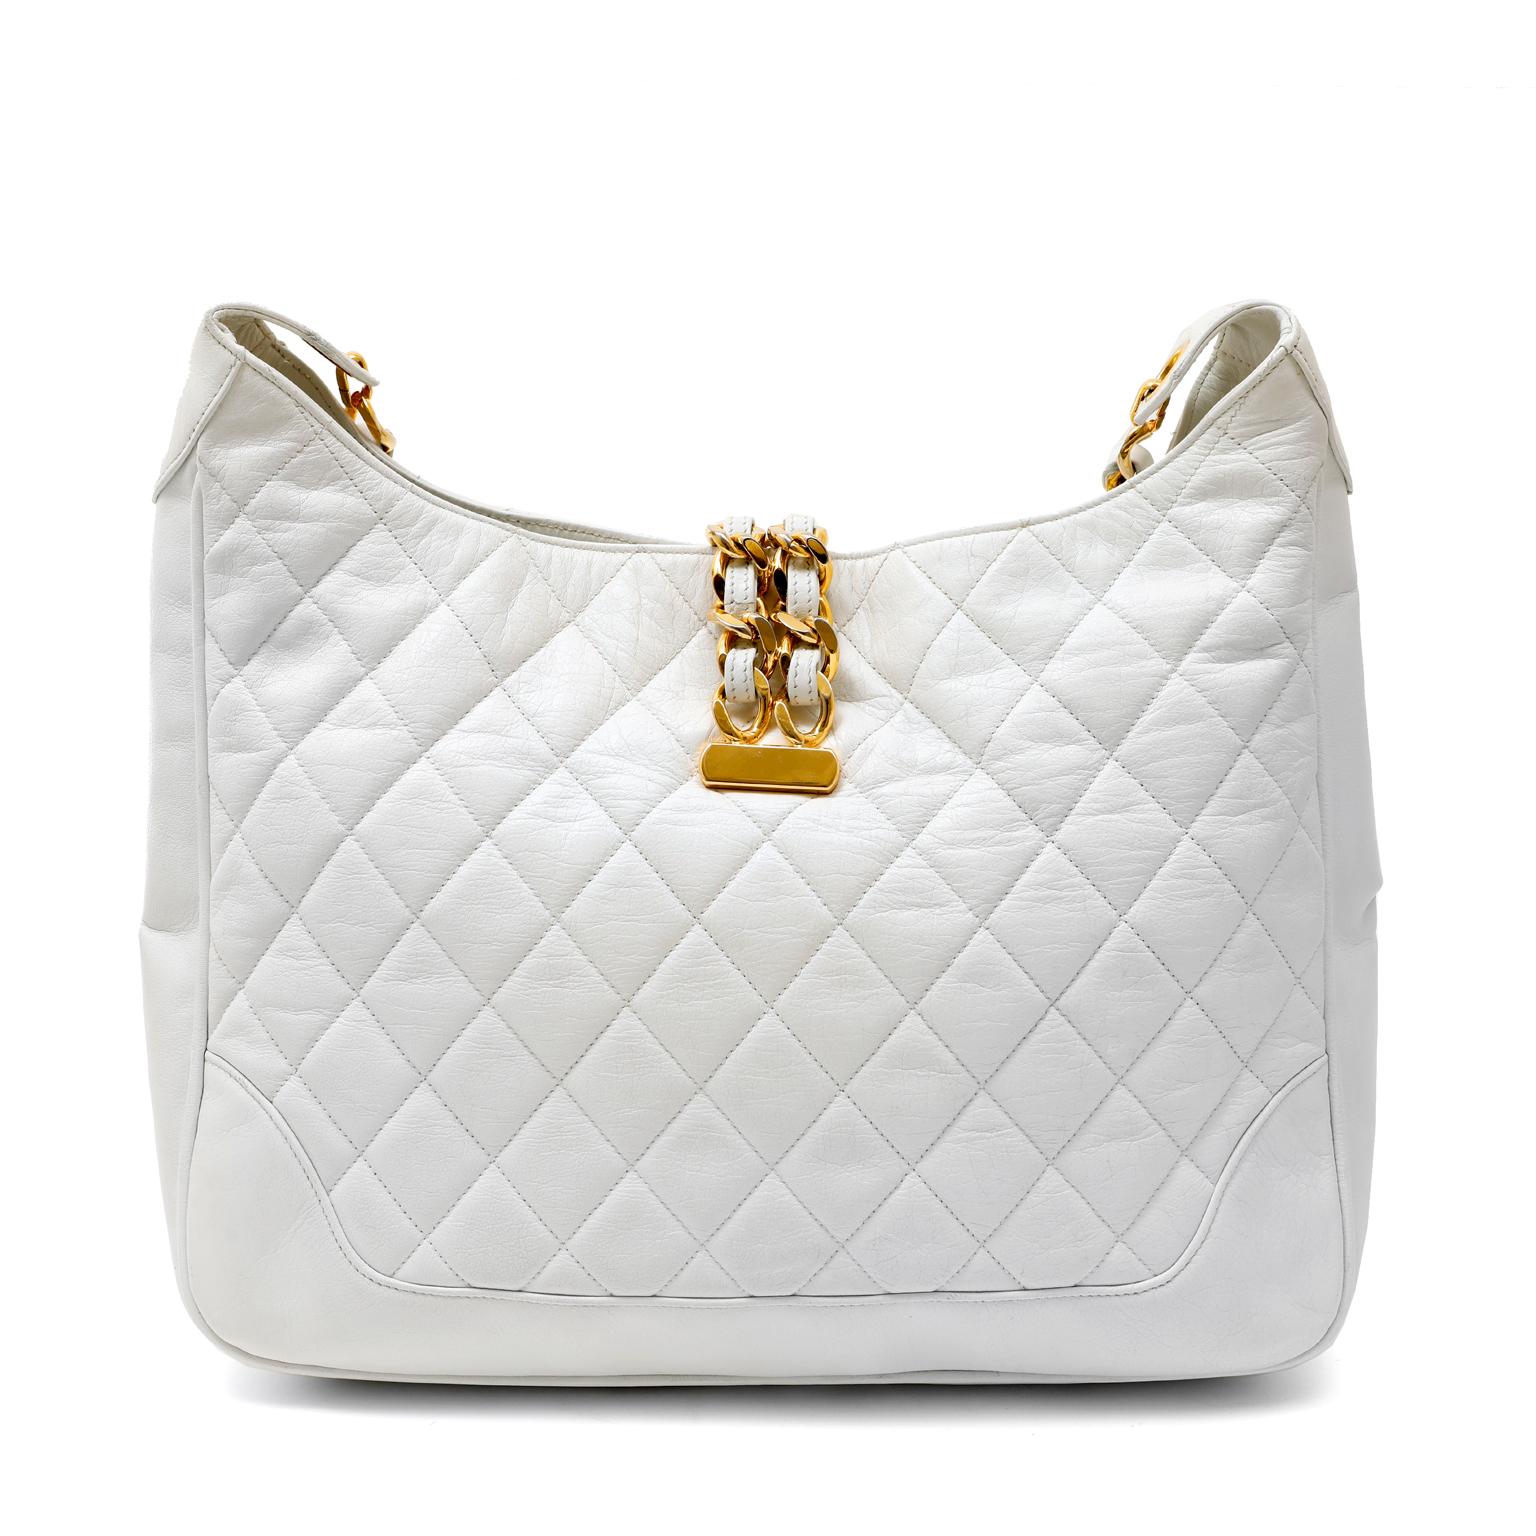 This authentic Chanel White Quilted Leather Structured Hobo is an early vintage piece in beautiful condition.  Rare and collectible; a unique style not often seen.  
Snowy white leather is quilted in signature Chanel diamond pattern.  Double leather